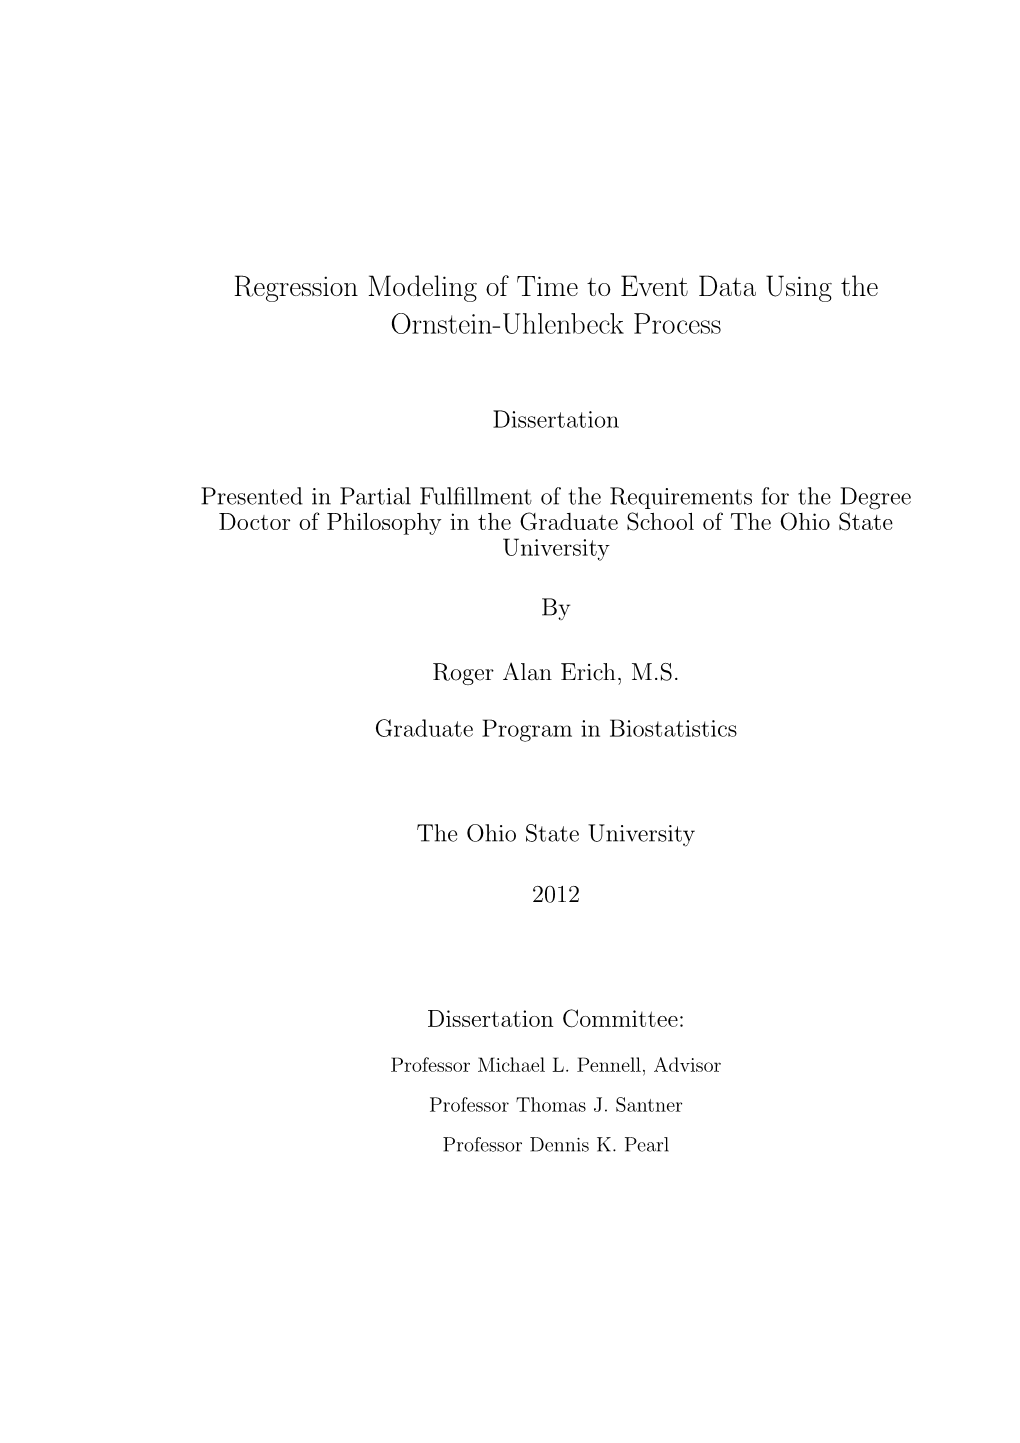 Regression Modeling of Time to Event Data Using the Ornstein-Uhlenbeck Process